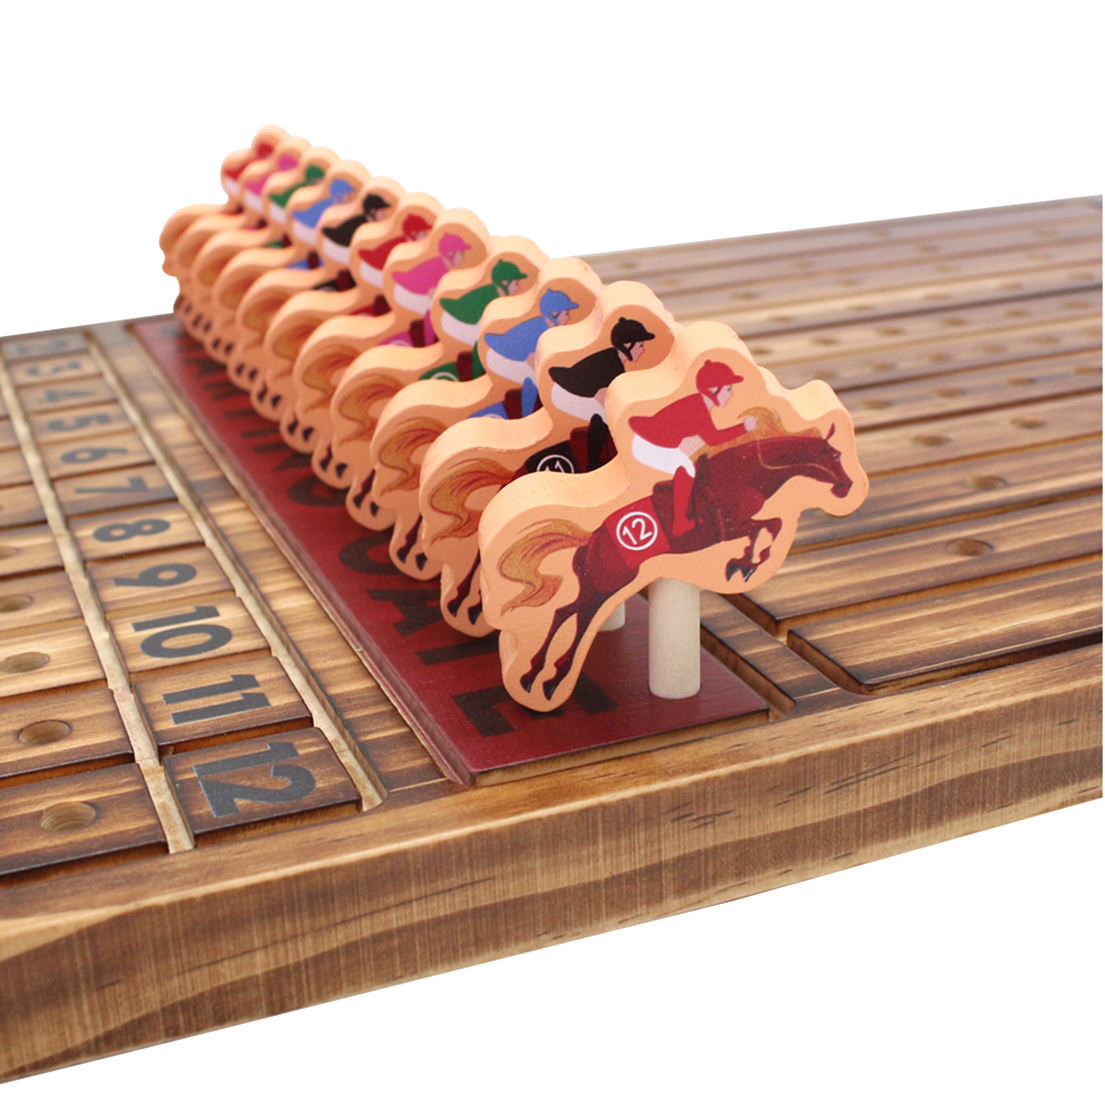 Charred Wooden Horse Race Board Games Wooden Horse Toys cing Board Games for Adults Teens Kids Family Night Fun Party Games